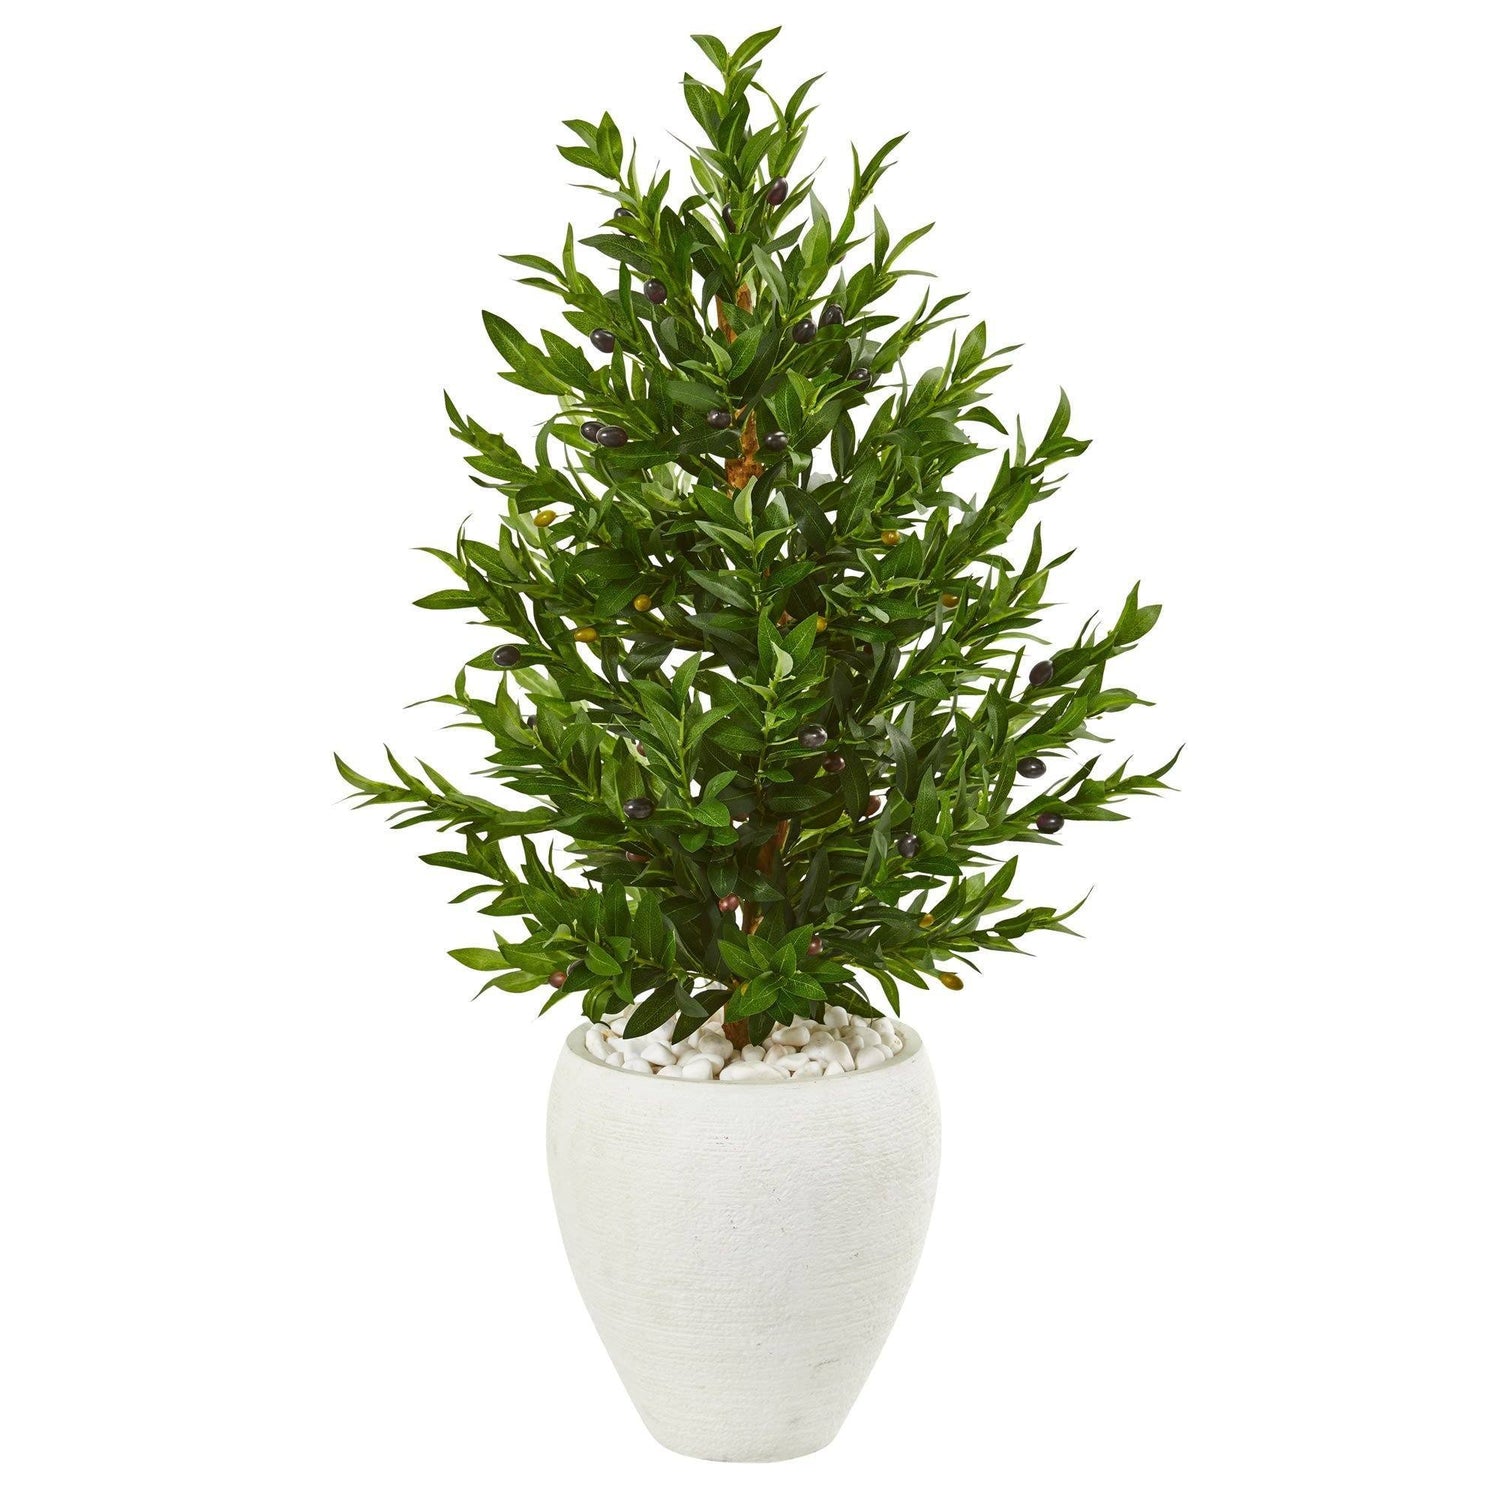 3.5’ Olive Cone Topiary Artificial Tree in White Planter (Indoor/Outdoor)